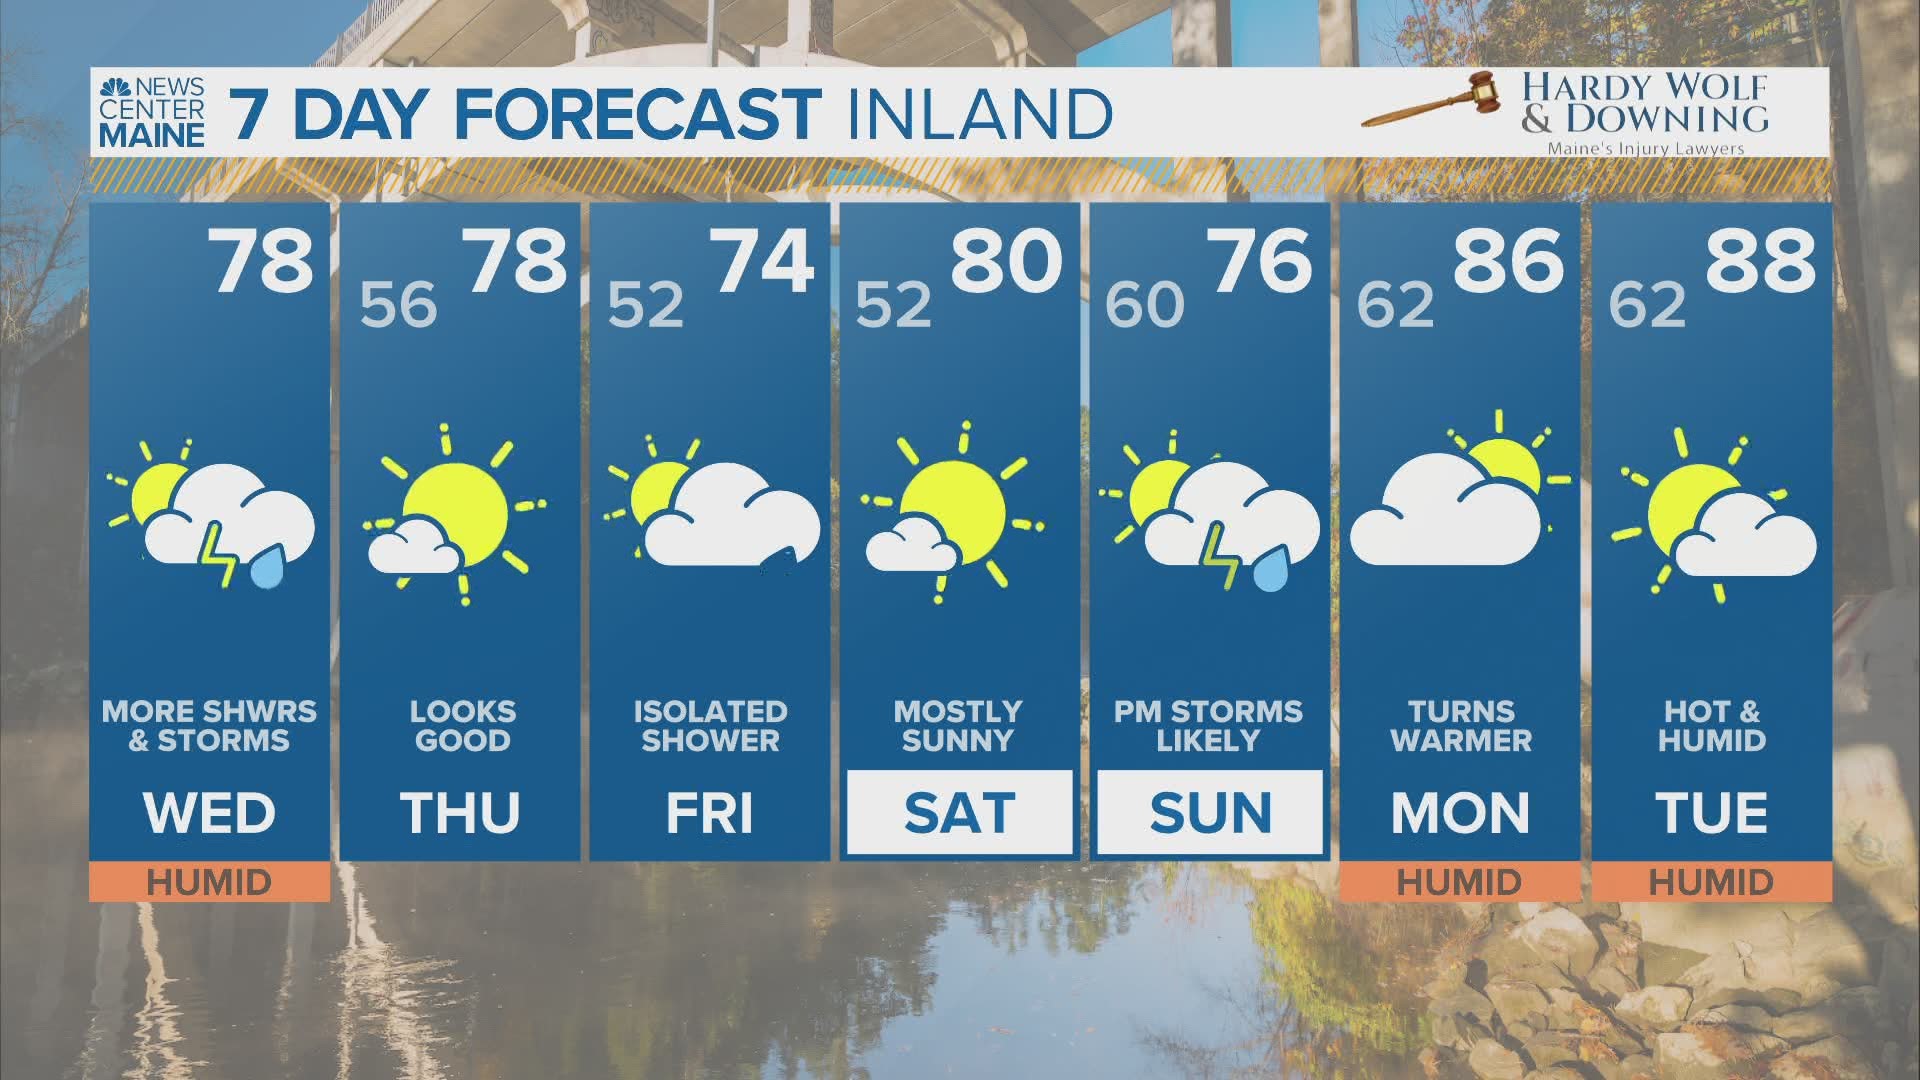 10 Day Forecast on WCSH in Maine